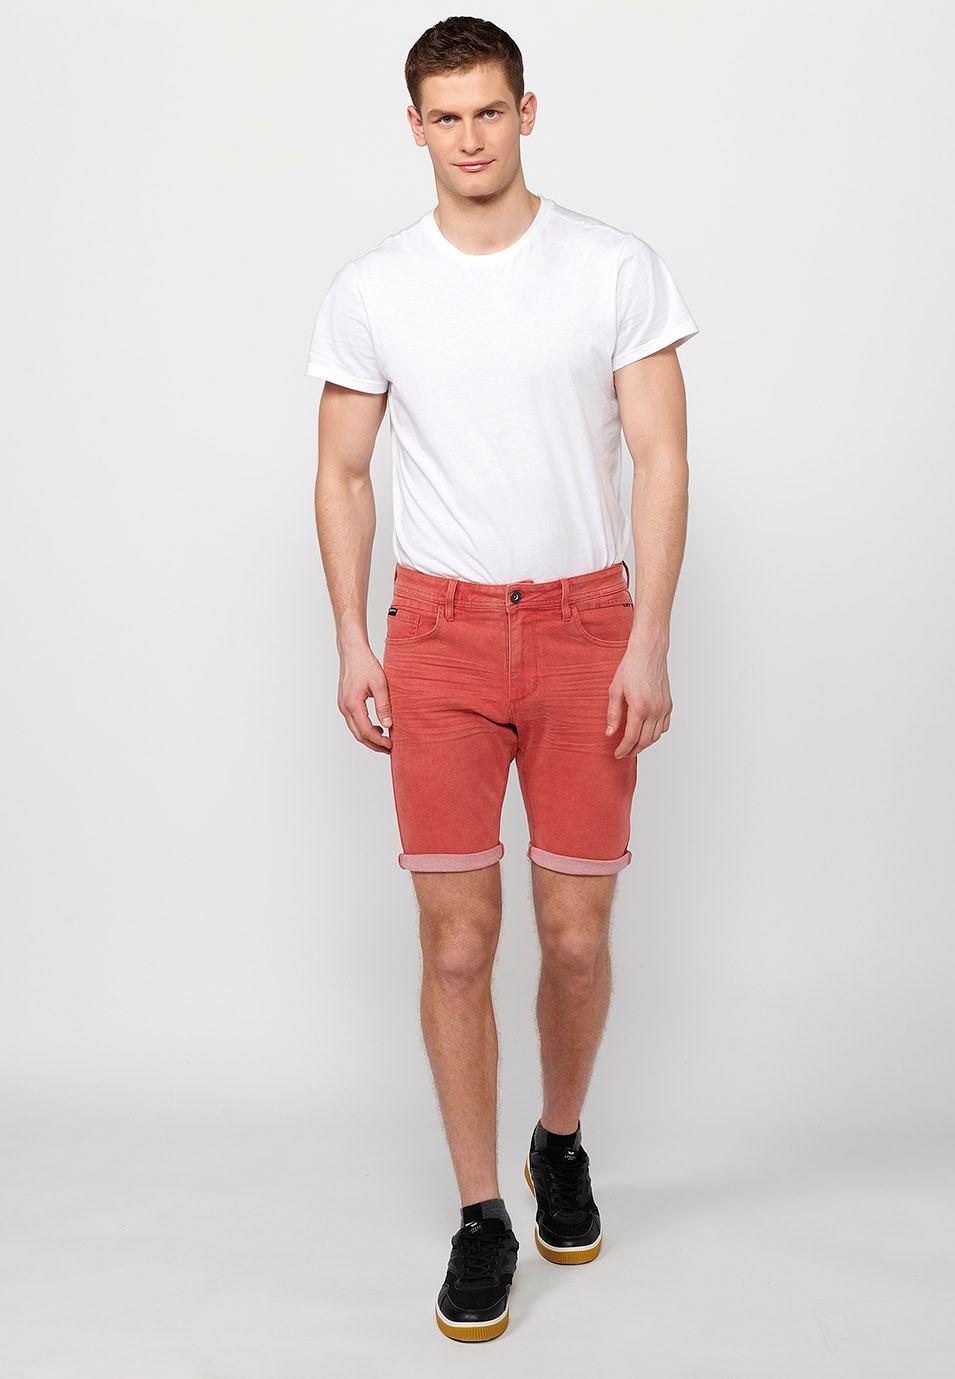 Shorts with a turn-up finish with front zipper and button closure and five pockets, one with a match pocket, in Red for Men